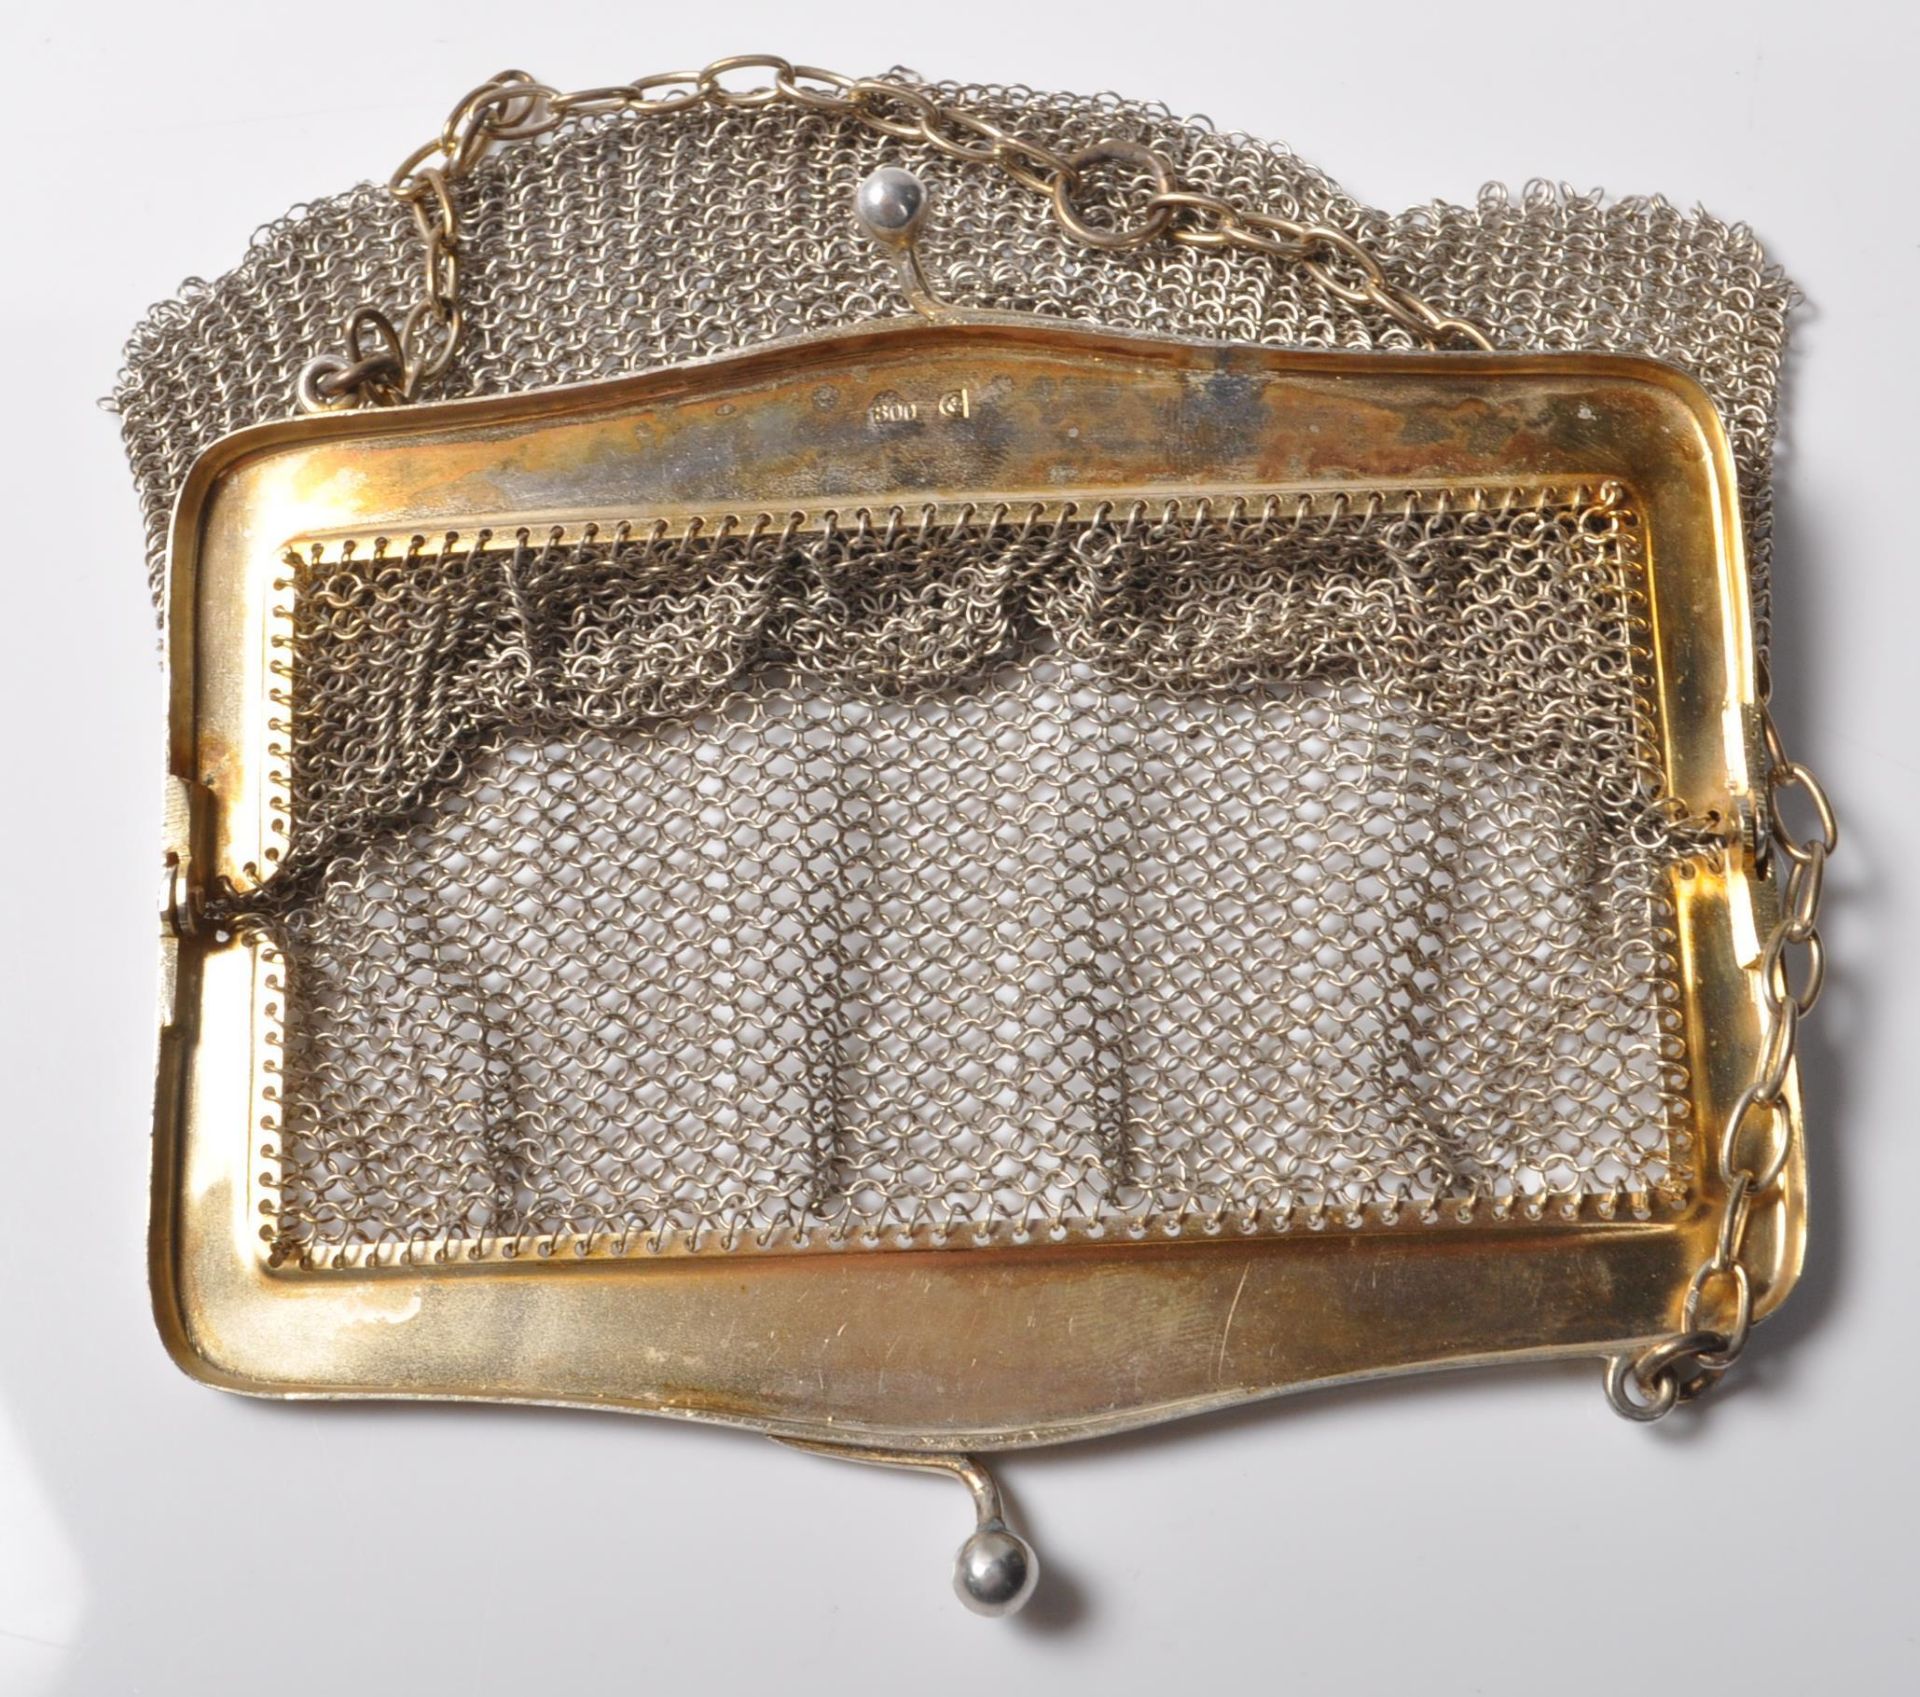 1930'S GERMAN SILVER EVENING PURSE - Image 4 of 5